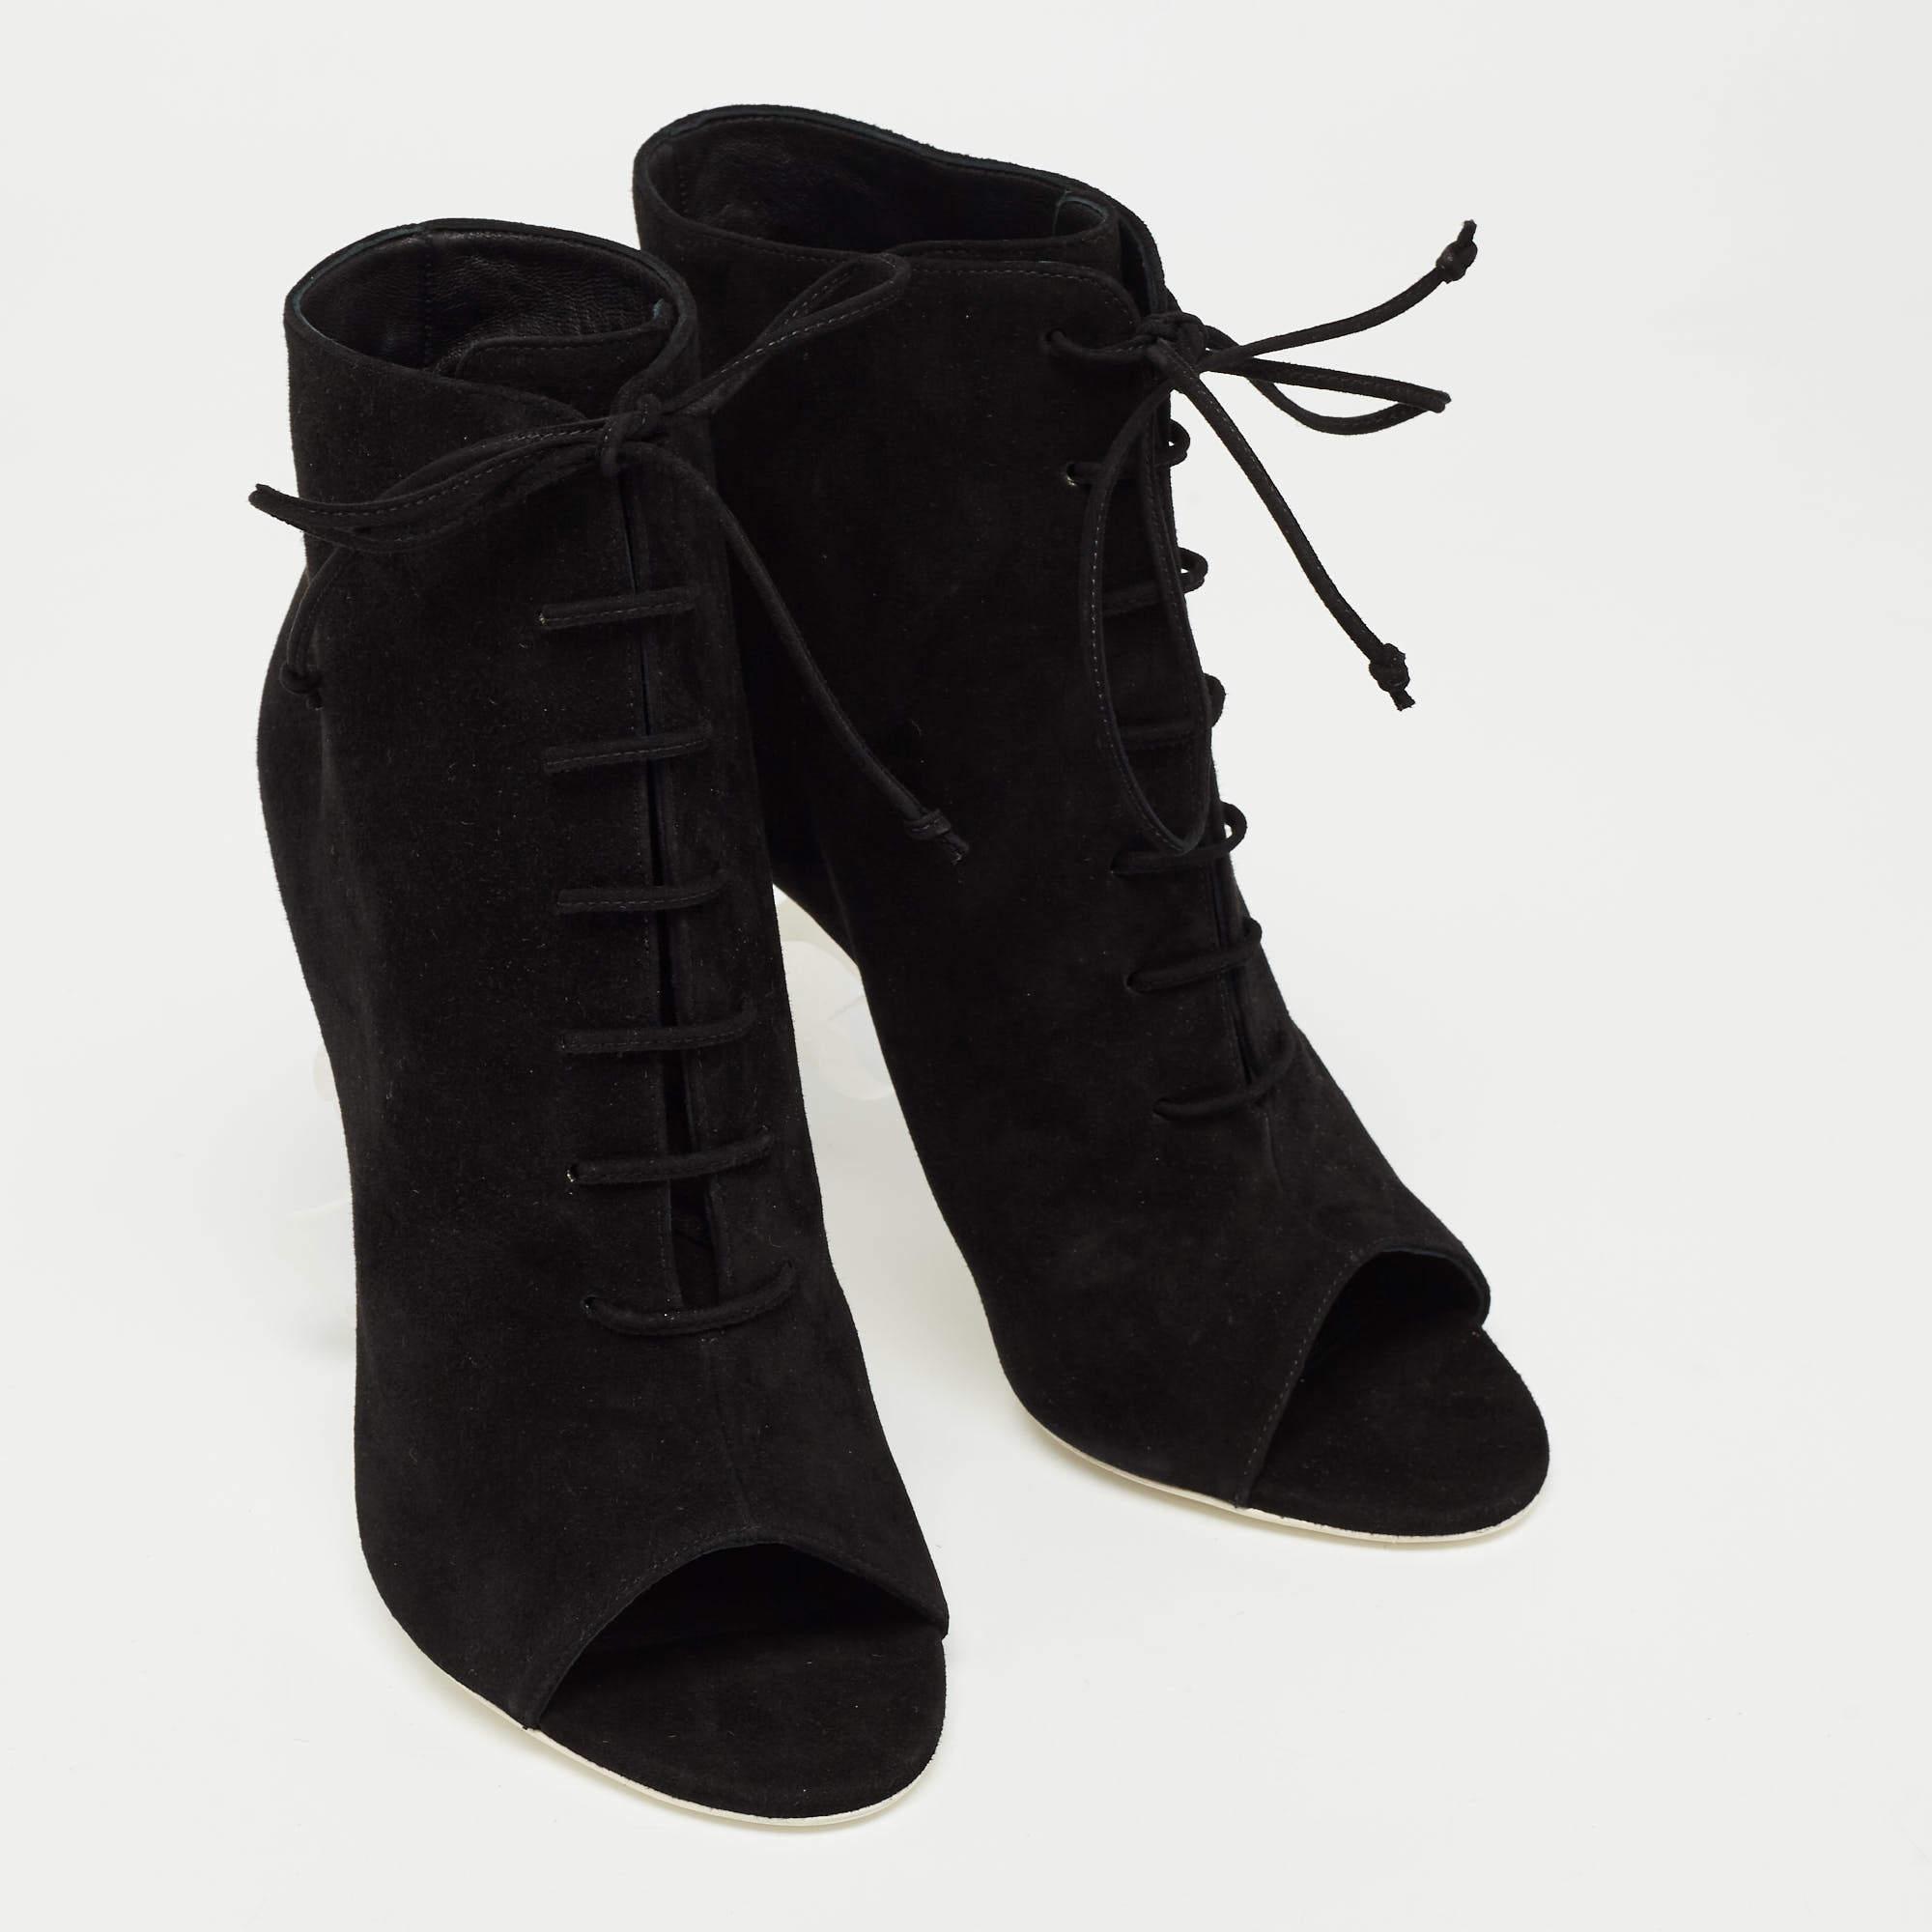 Off-White Black Suede Open Toe Lace Up Ankle Booties Size 39 In New Condition For Sale In Dubai, Al Qouz 2